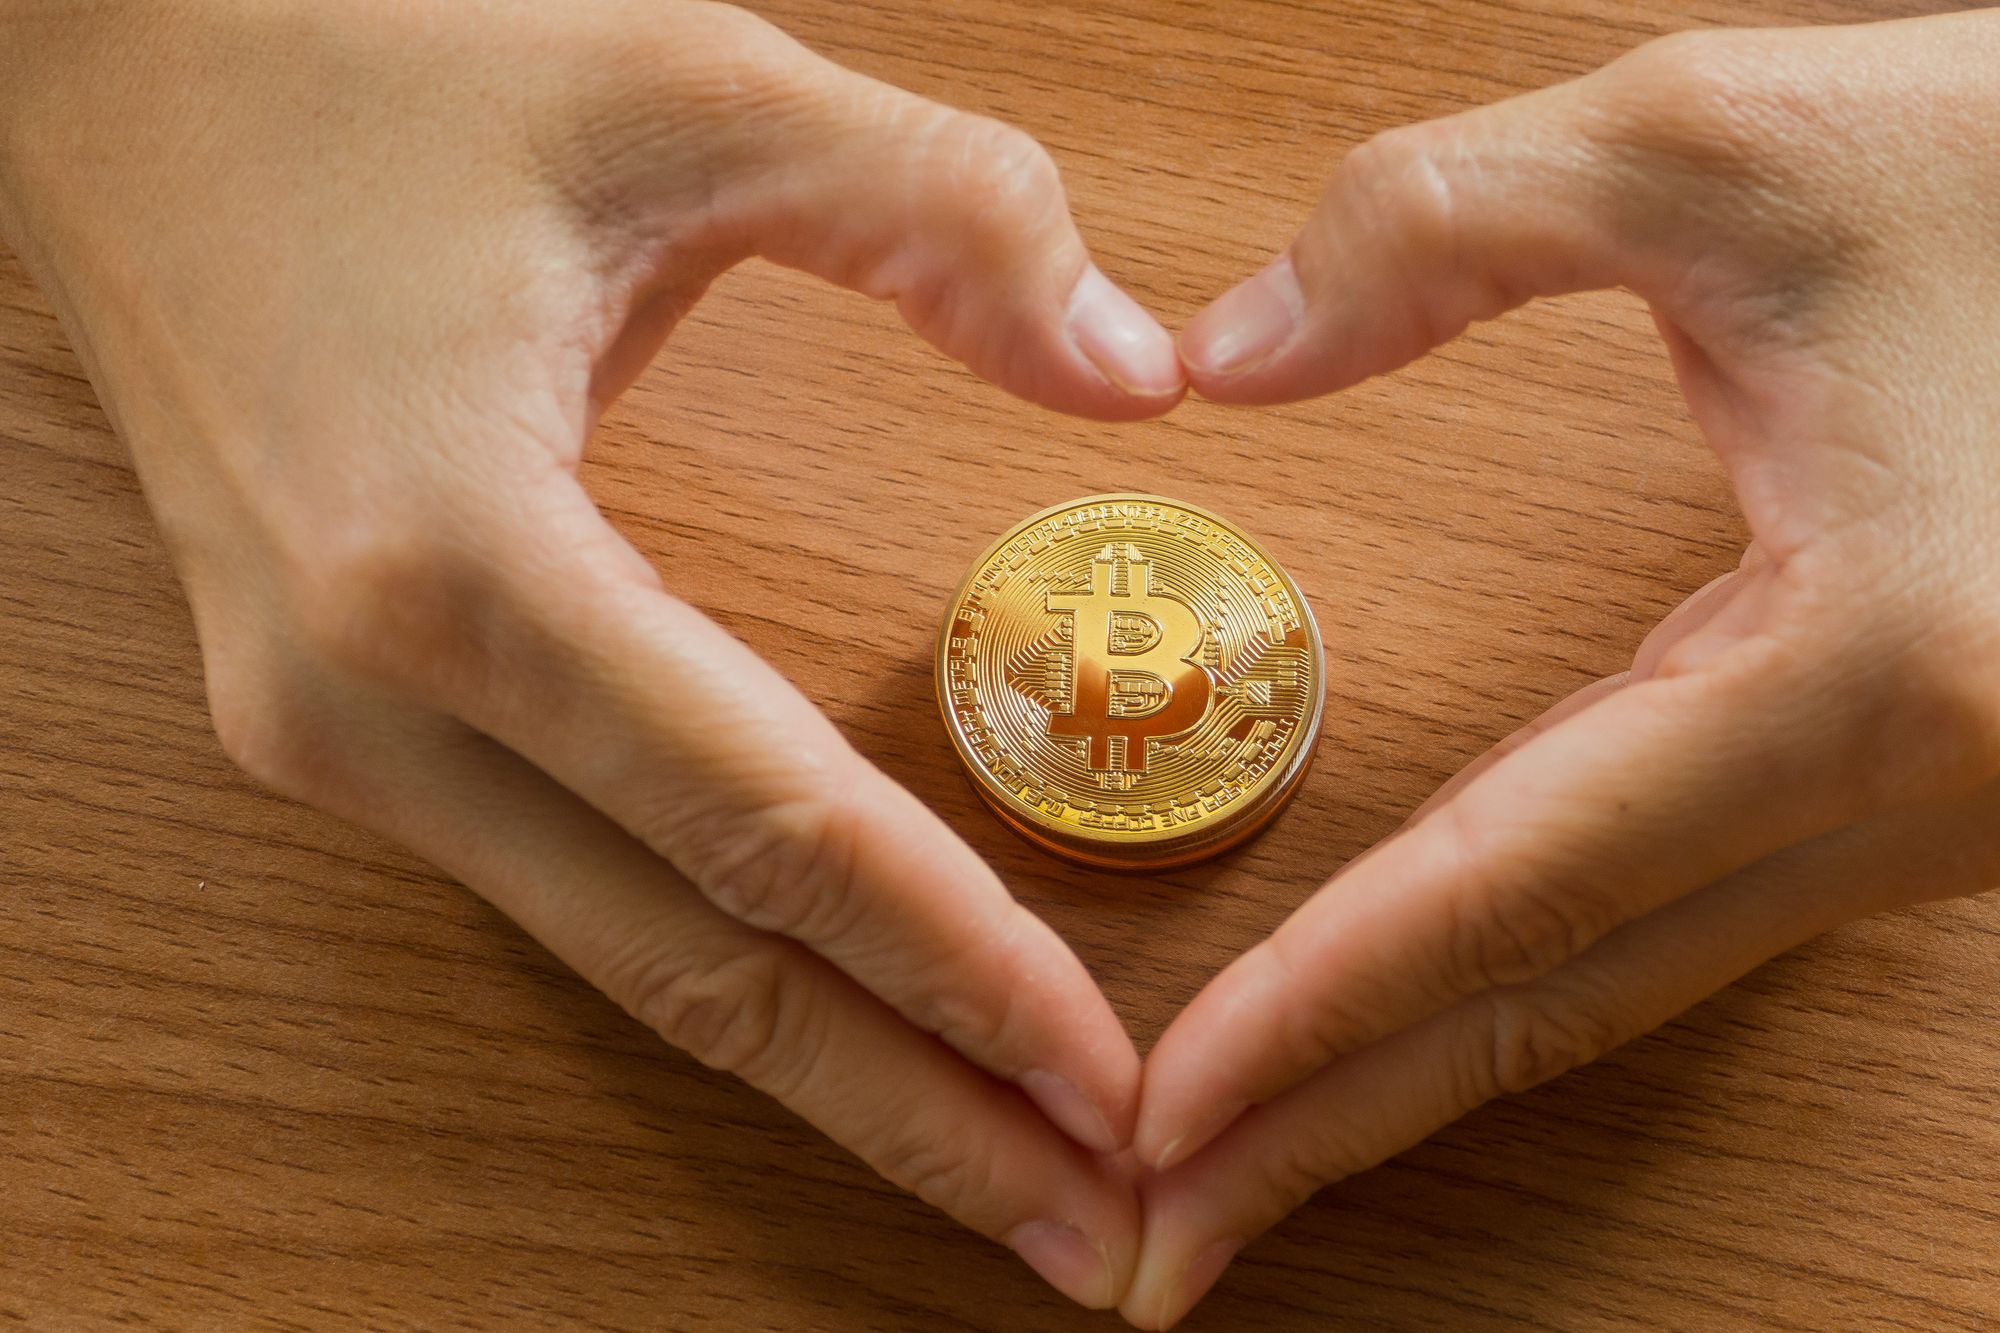 How Can Your Charity Organization Accept Cryptocurrency Donations?